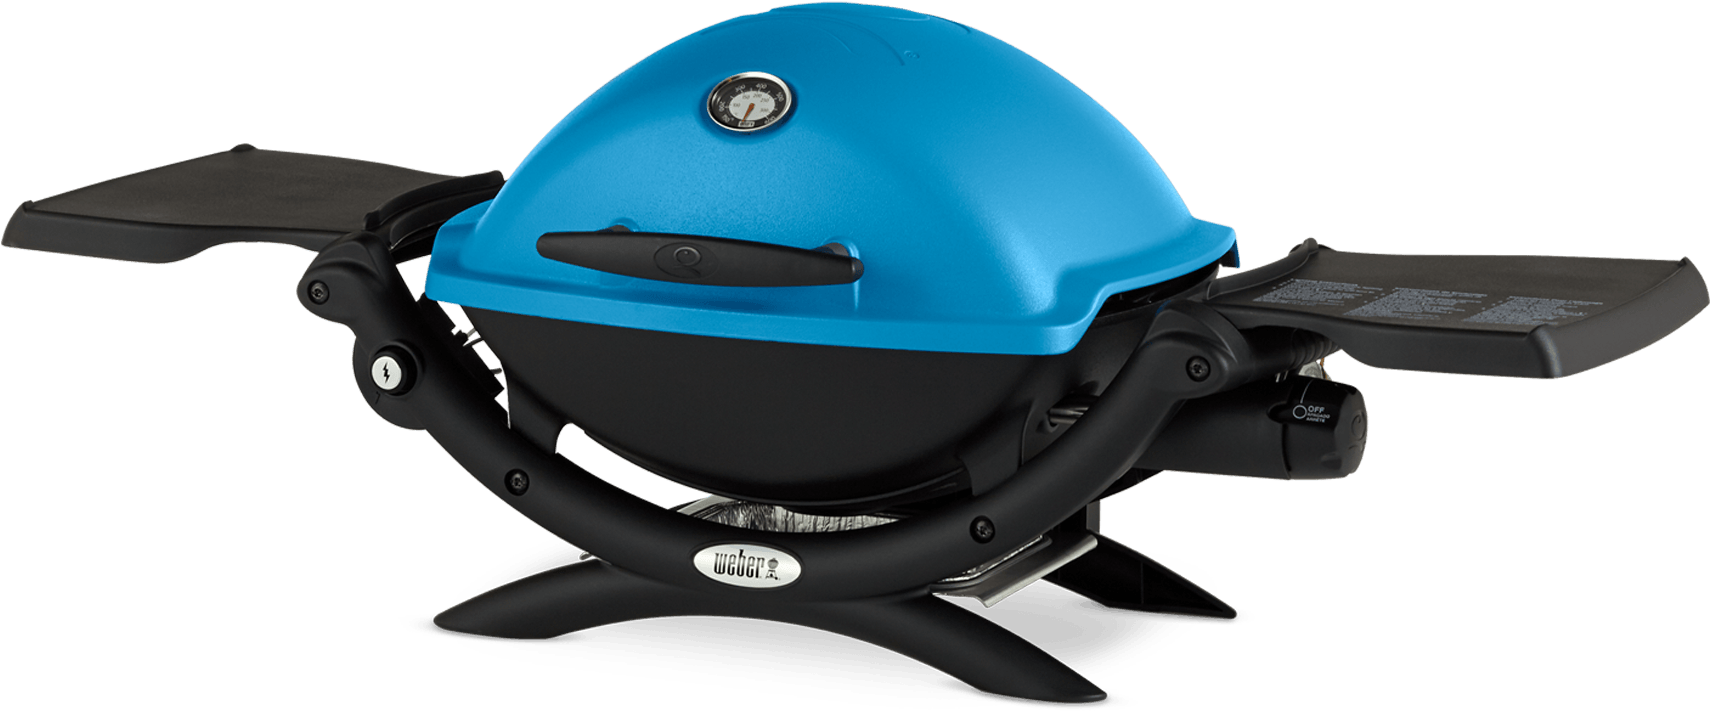 A Blue And Black Barbecue Grill